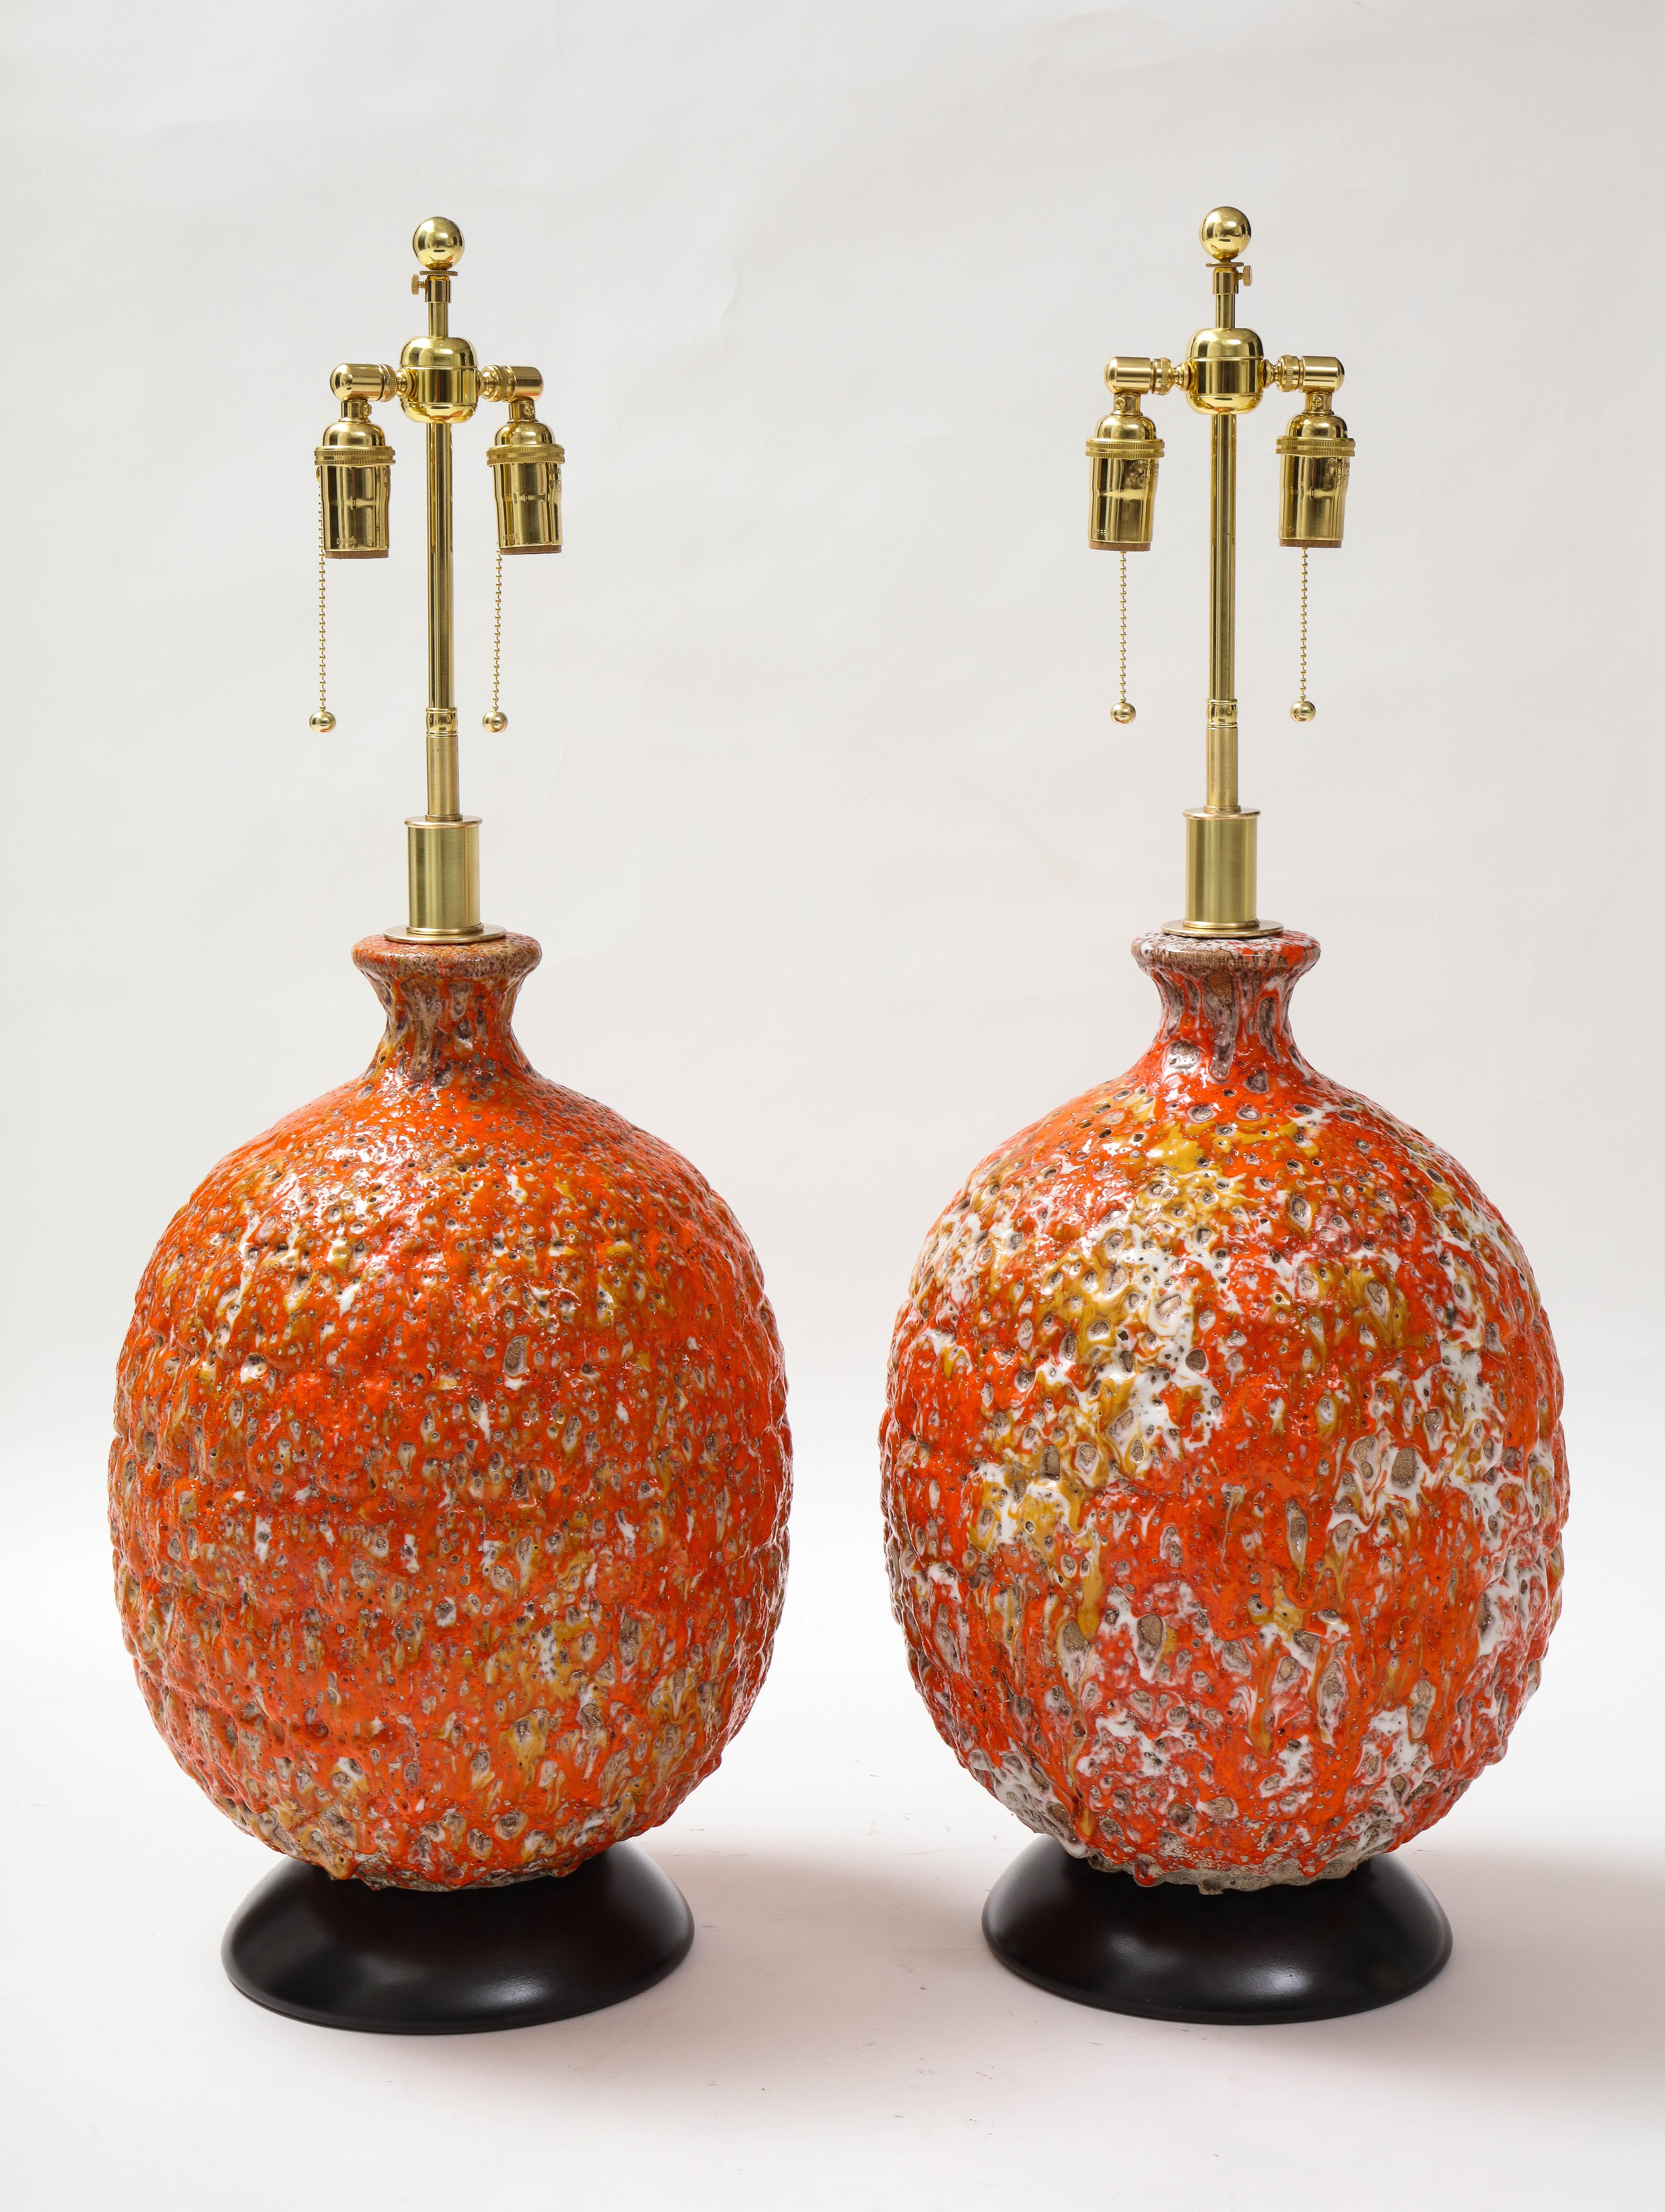 Pair of giant Italian ceramic lamps with a beautiful Volcanic glazed finish.
The lamps have been newly rewired with adjustable polished brass double clusters
that take standard size light bulbs.
The height to the top of the ceramic is 20